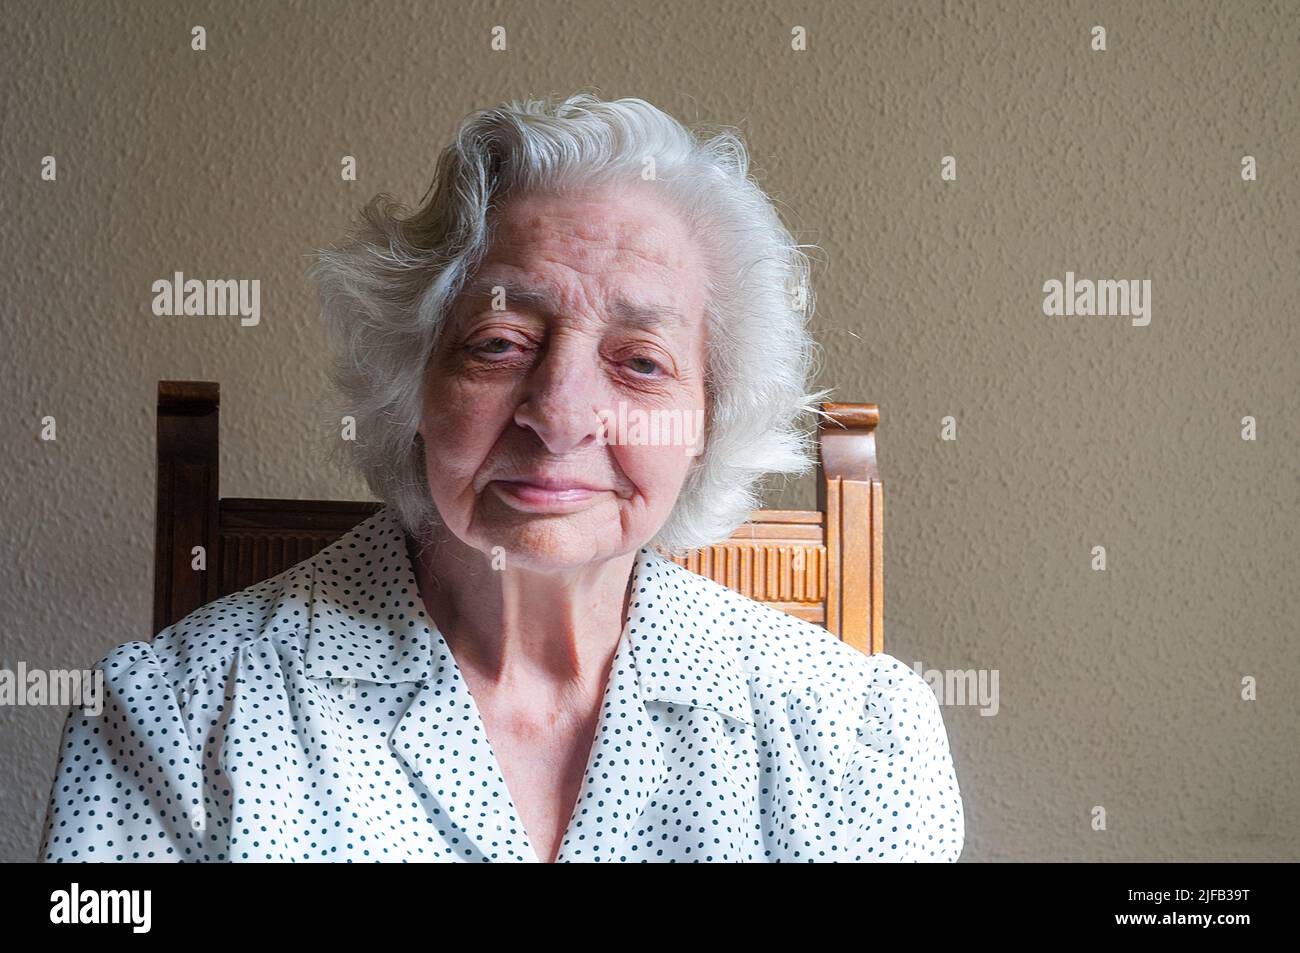 Portrait of old lady looking at the camera. Stock Photo